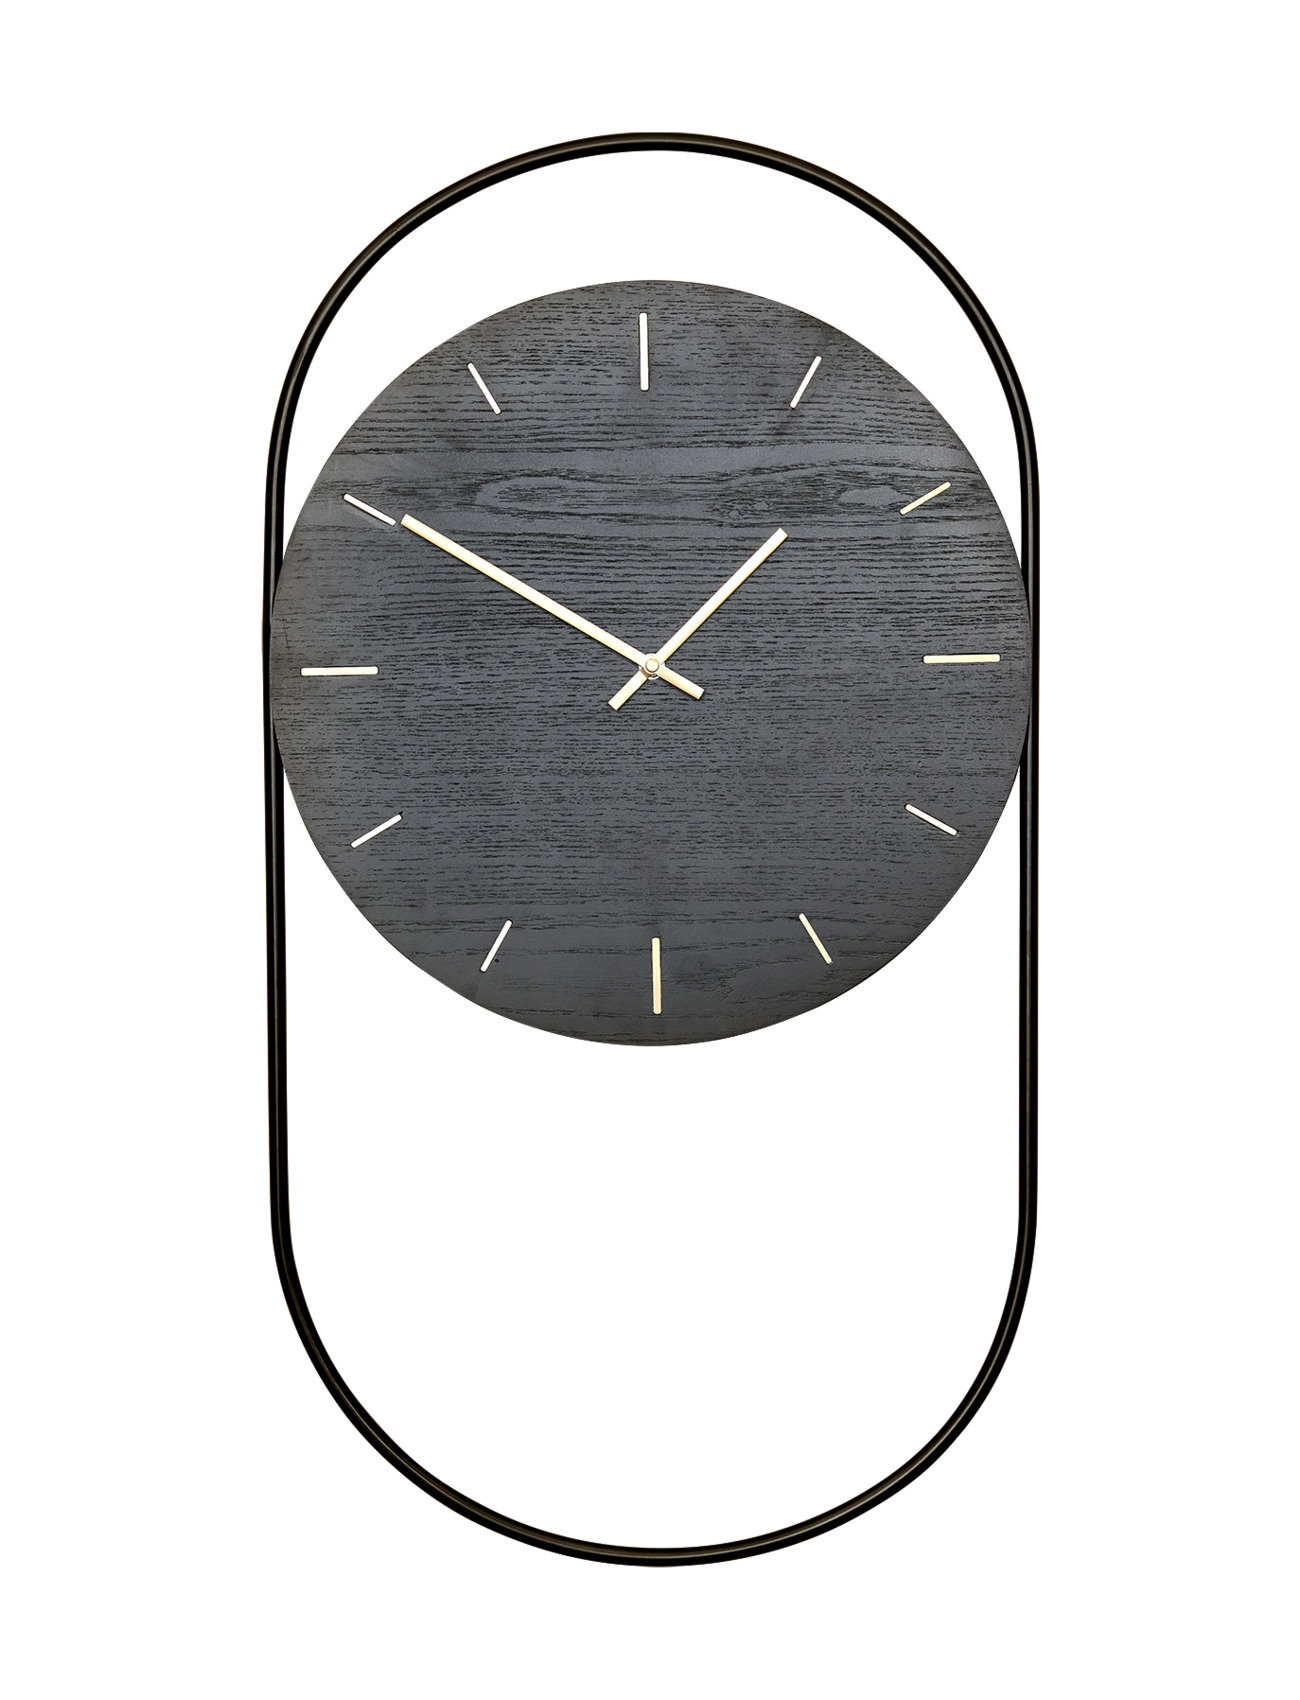 A-Wall Clock Black With Black Metal Ring Home Decoration Watches Wall Clocks Black Andersen Furniture